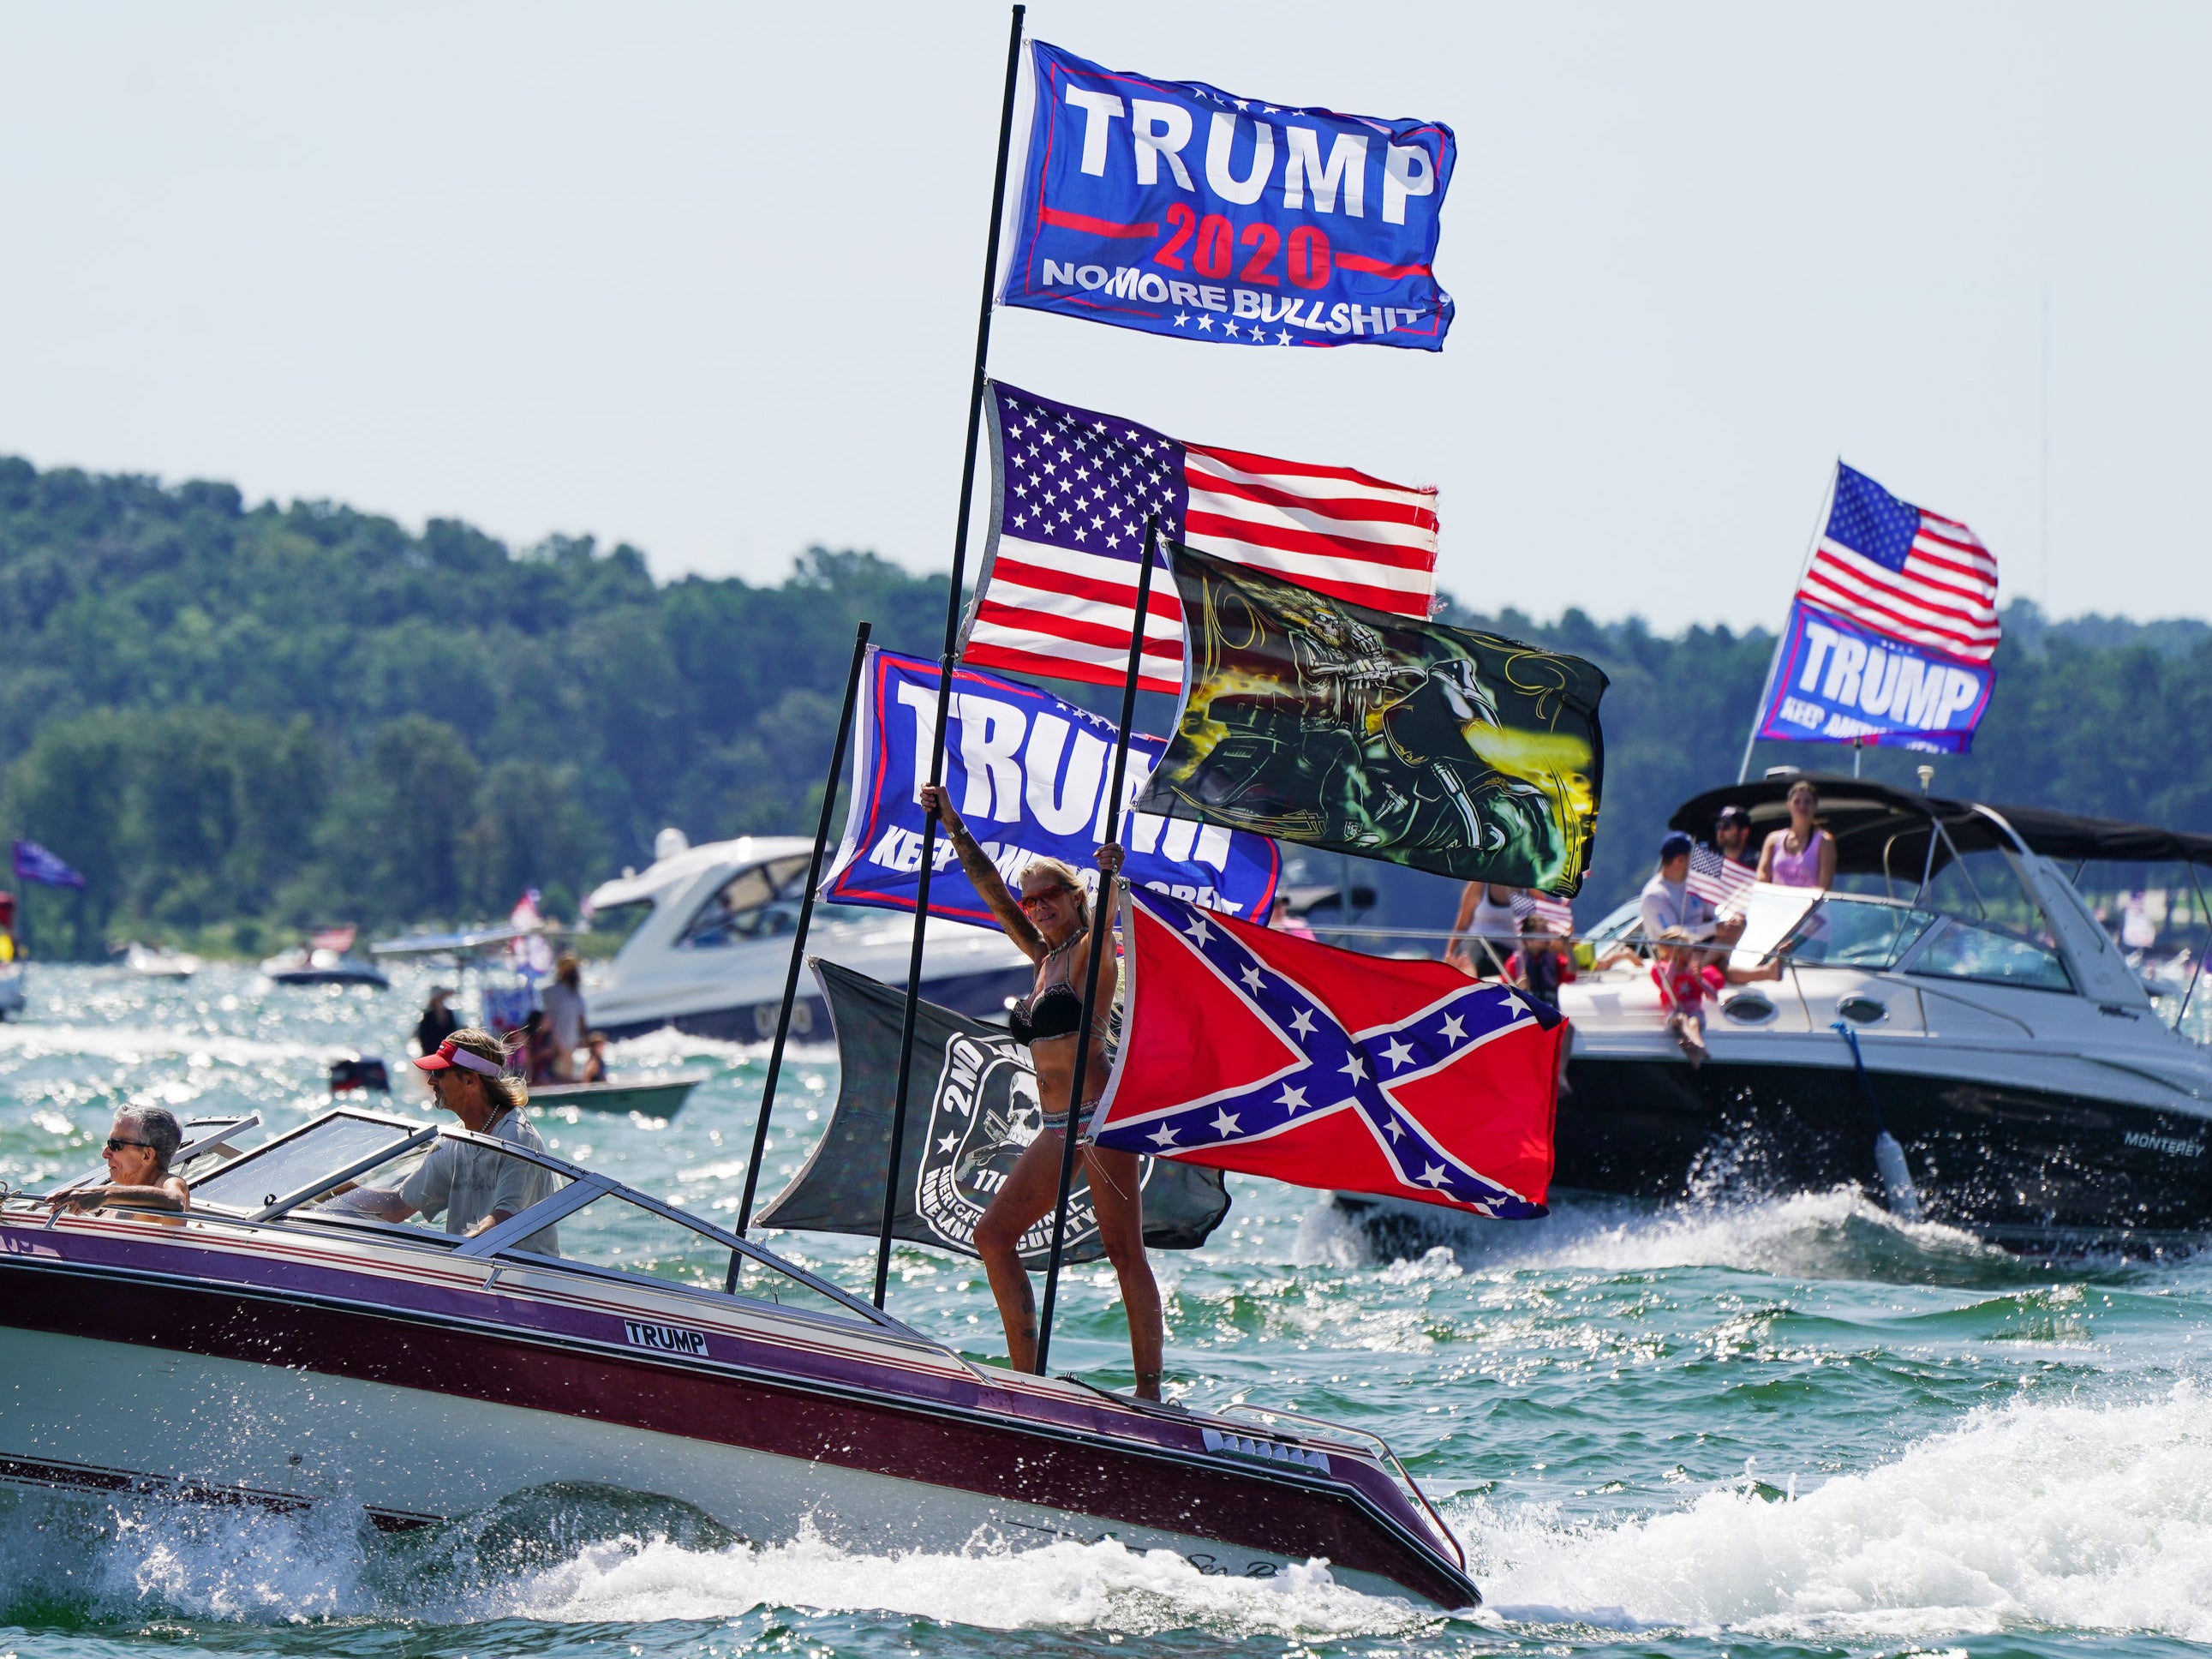 Boats adorned with US and Trump campaign flags are seen on Lake Lanier during a 'Great American Boat Parade' in Georgia